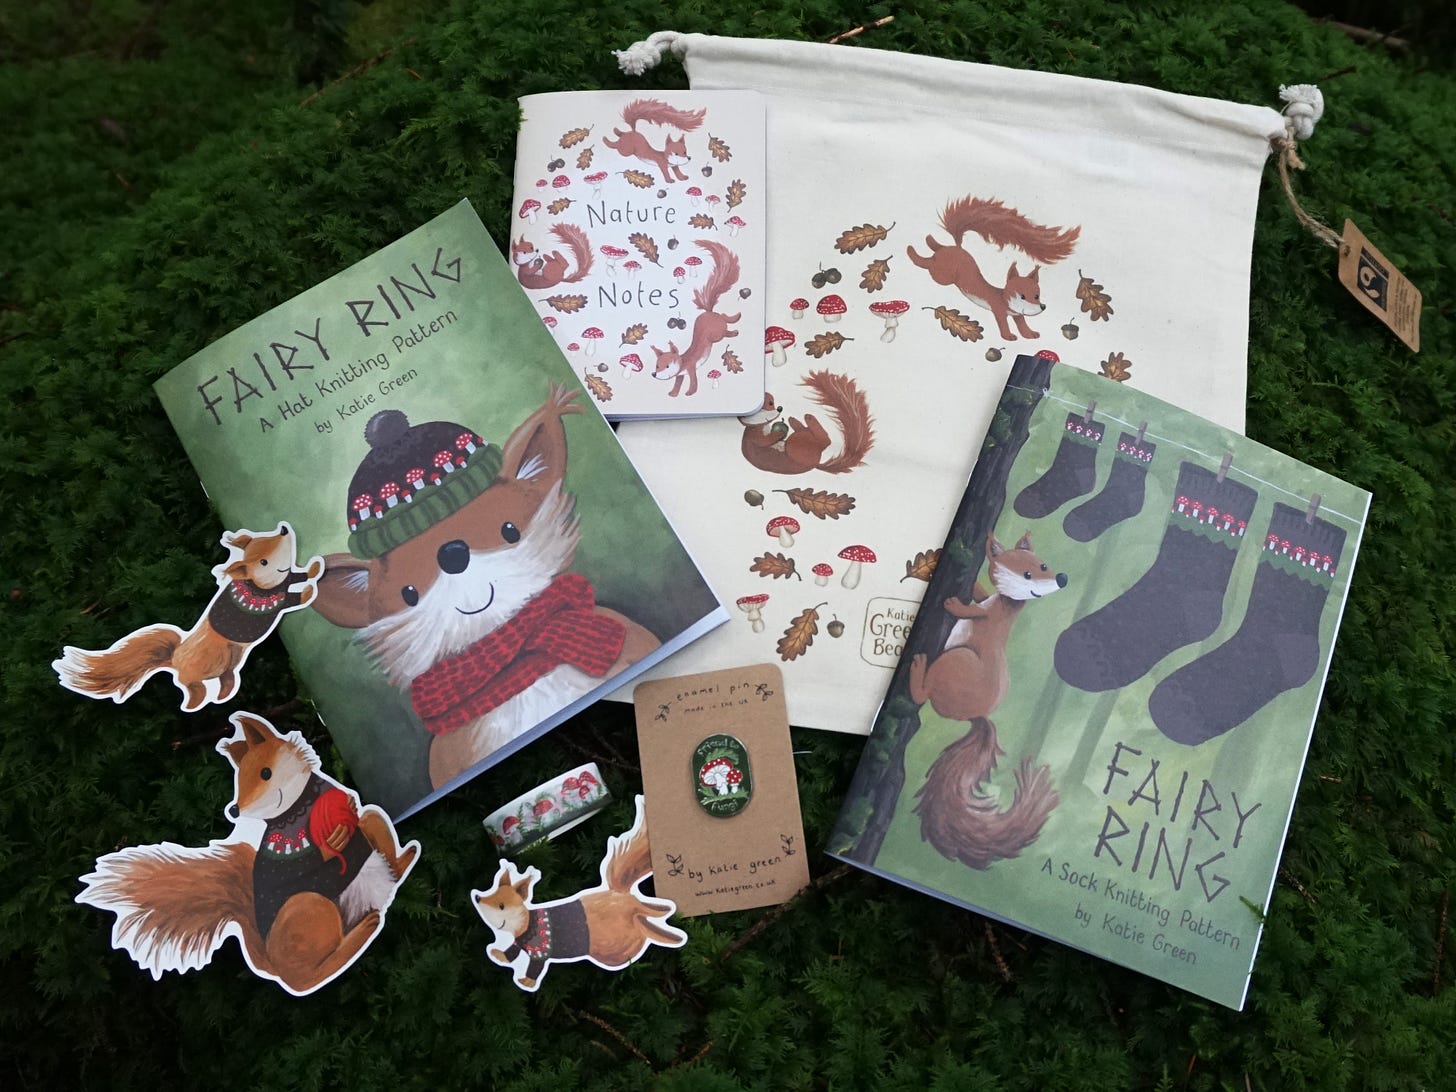 Image description: A pile of cute goods laid out on a bed of squishy green moss. There is an unbleached cotton drawstring project bag printed with tumbling squirrels, leaves and mushrooms. There's a little notebook entitled Nature Notes with the same squirrl illustration on the front. There are two illustrated pattern booklets, three cute illustrated stickers of squirrels wearing cardigans, a roll of mushroom washi tape and an enamel pin.